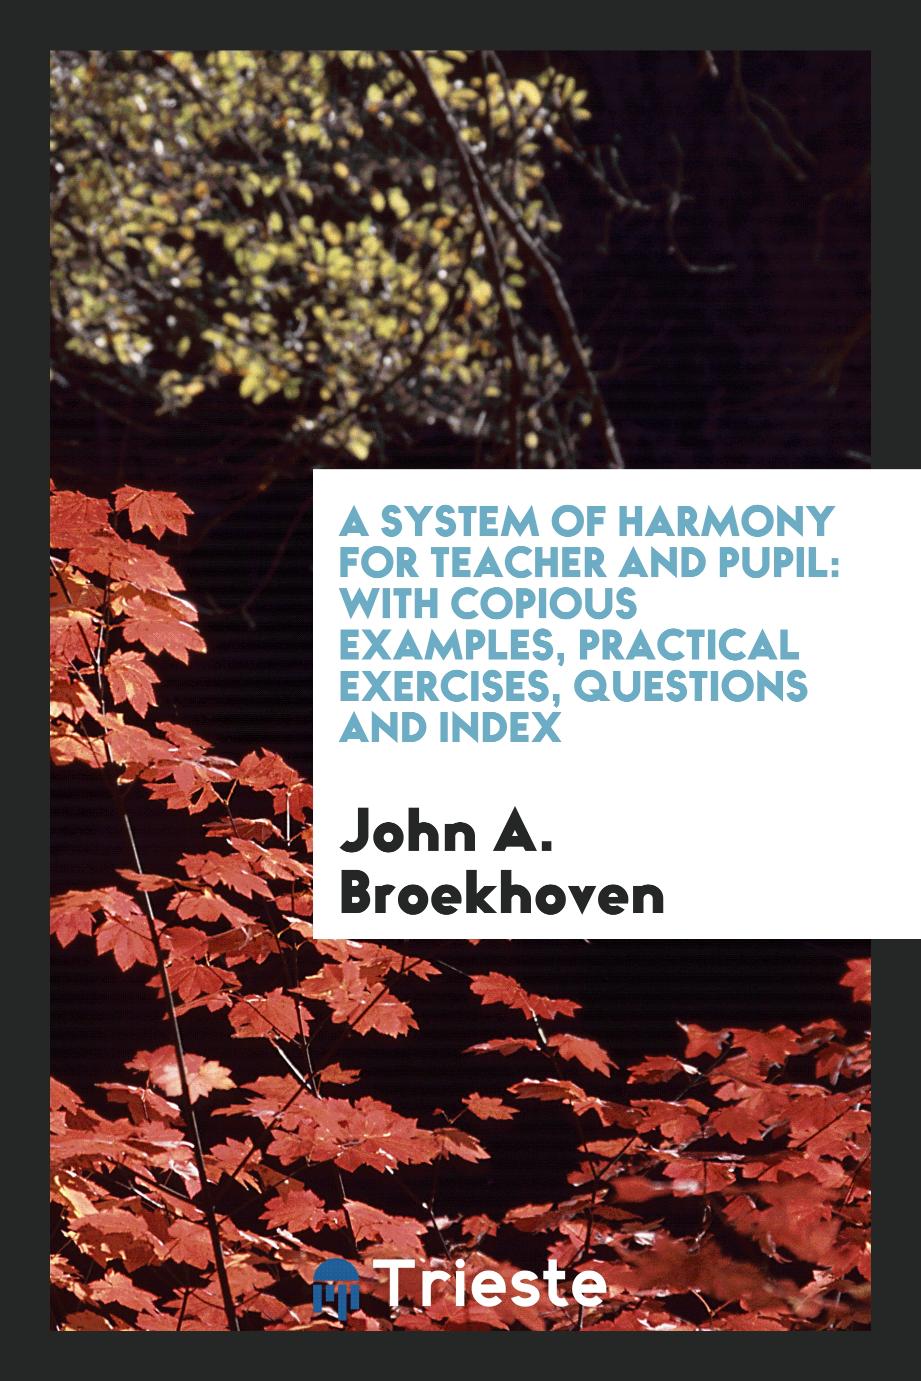 A System of Harmony for Teacher and Pupil: With Copious Examples, Practical Exercises, Questions and Index